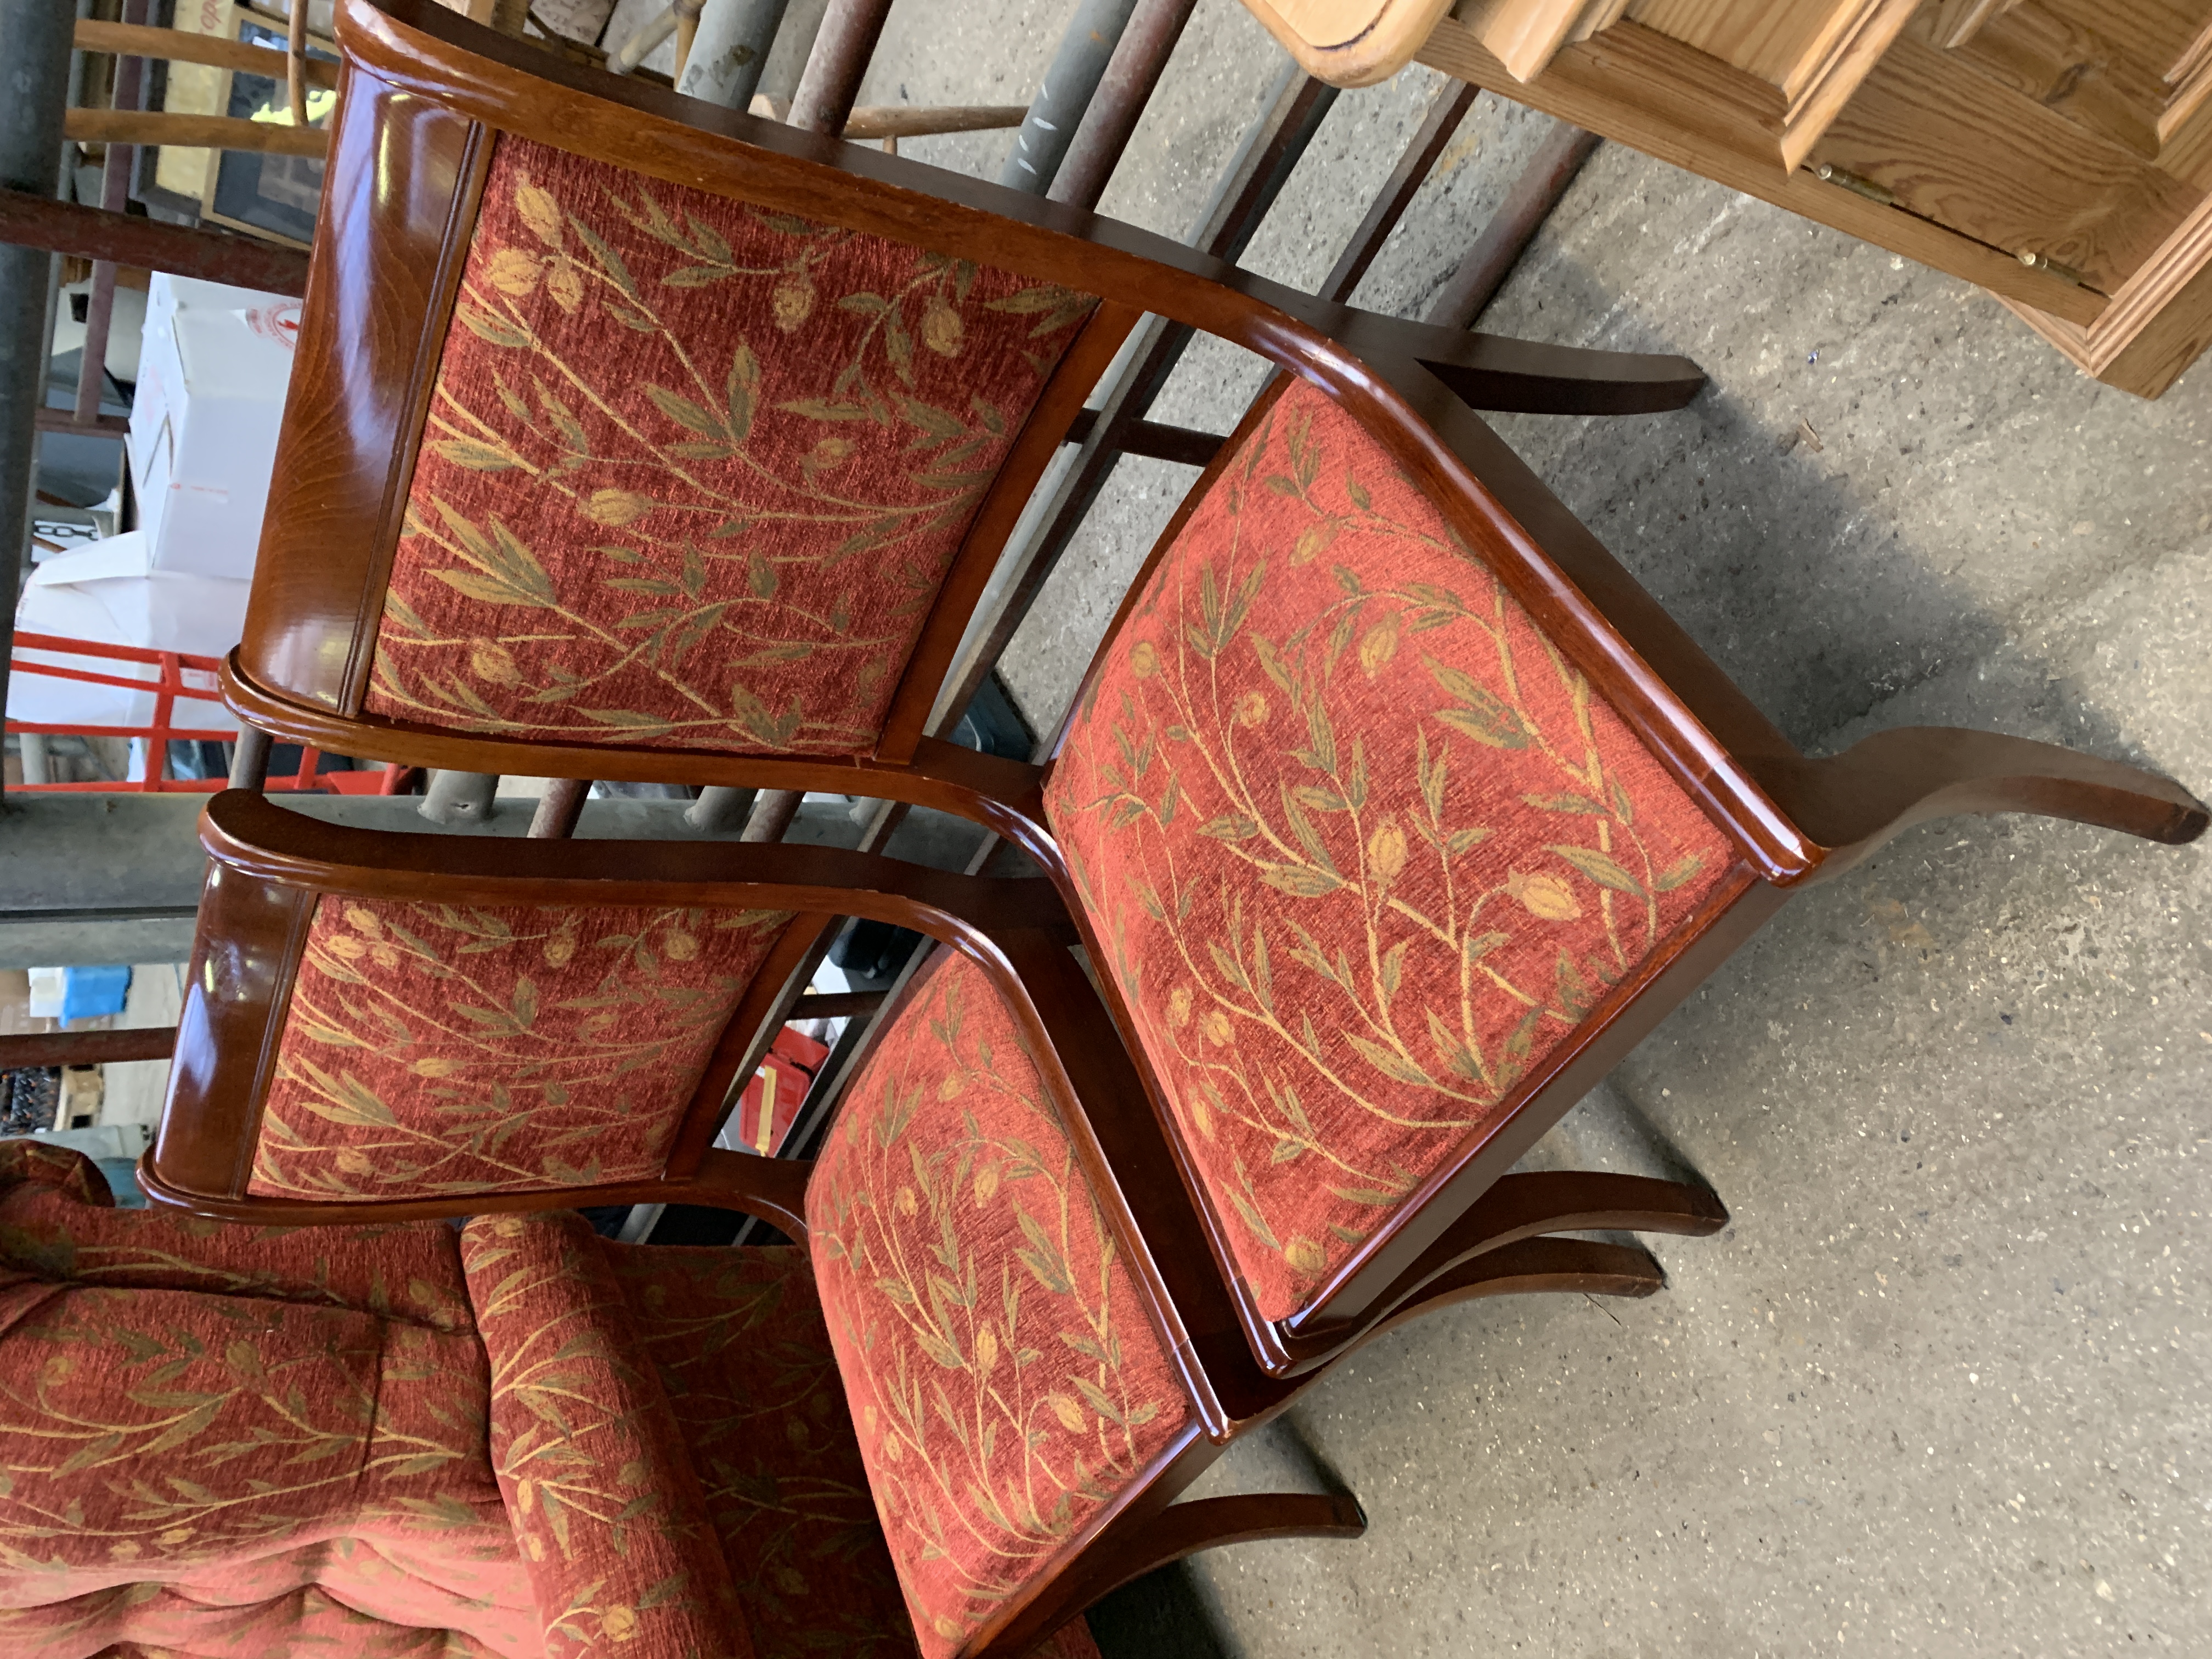 Pair of dining chairs with sabre legs upholstered in dark red and gold floral design. - Image 2 of 3